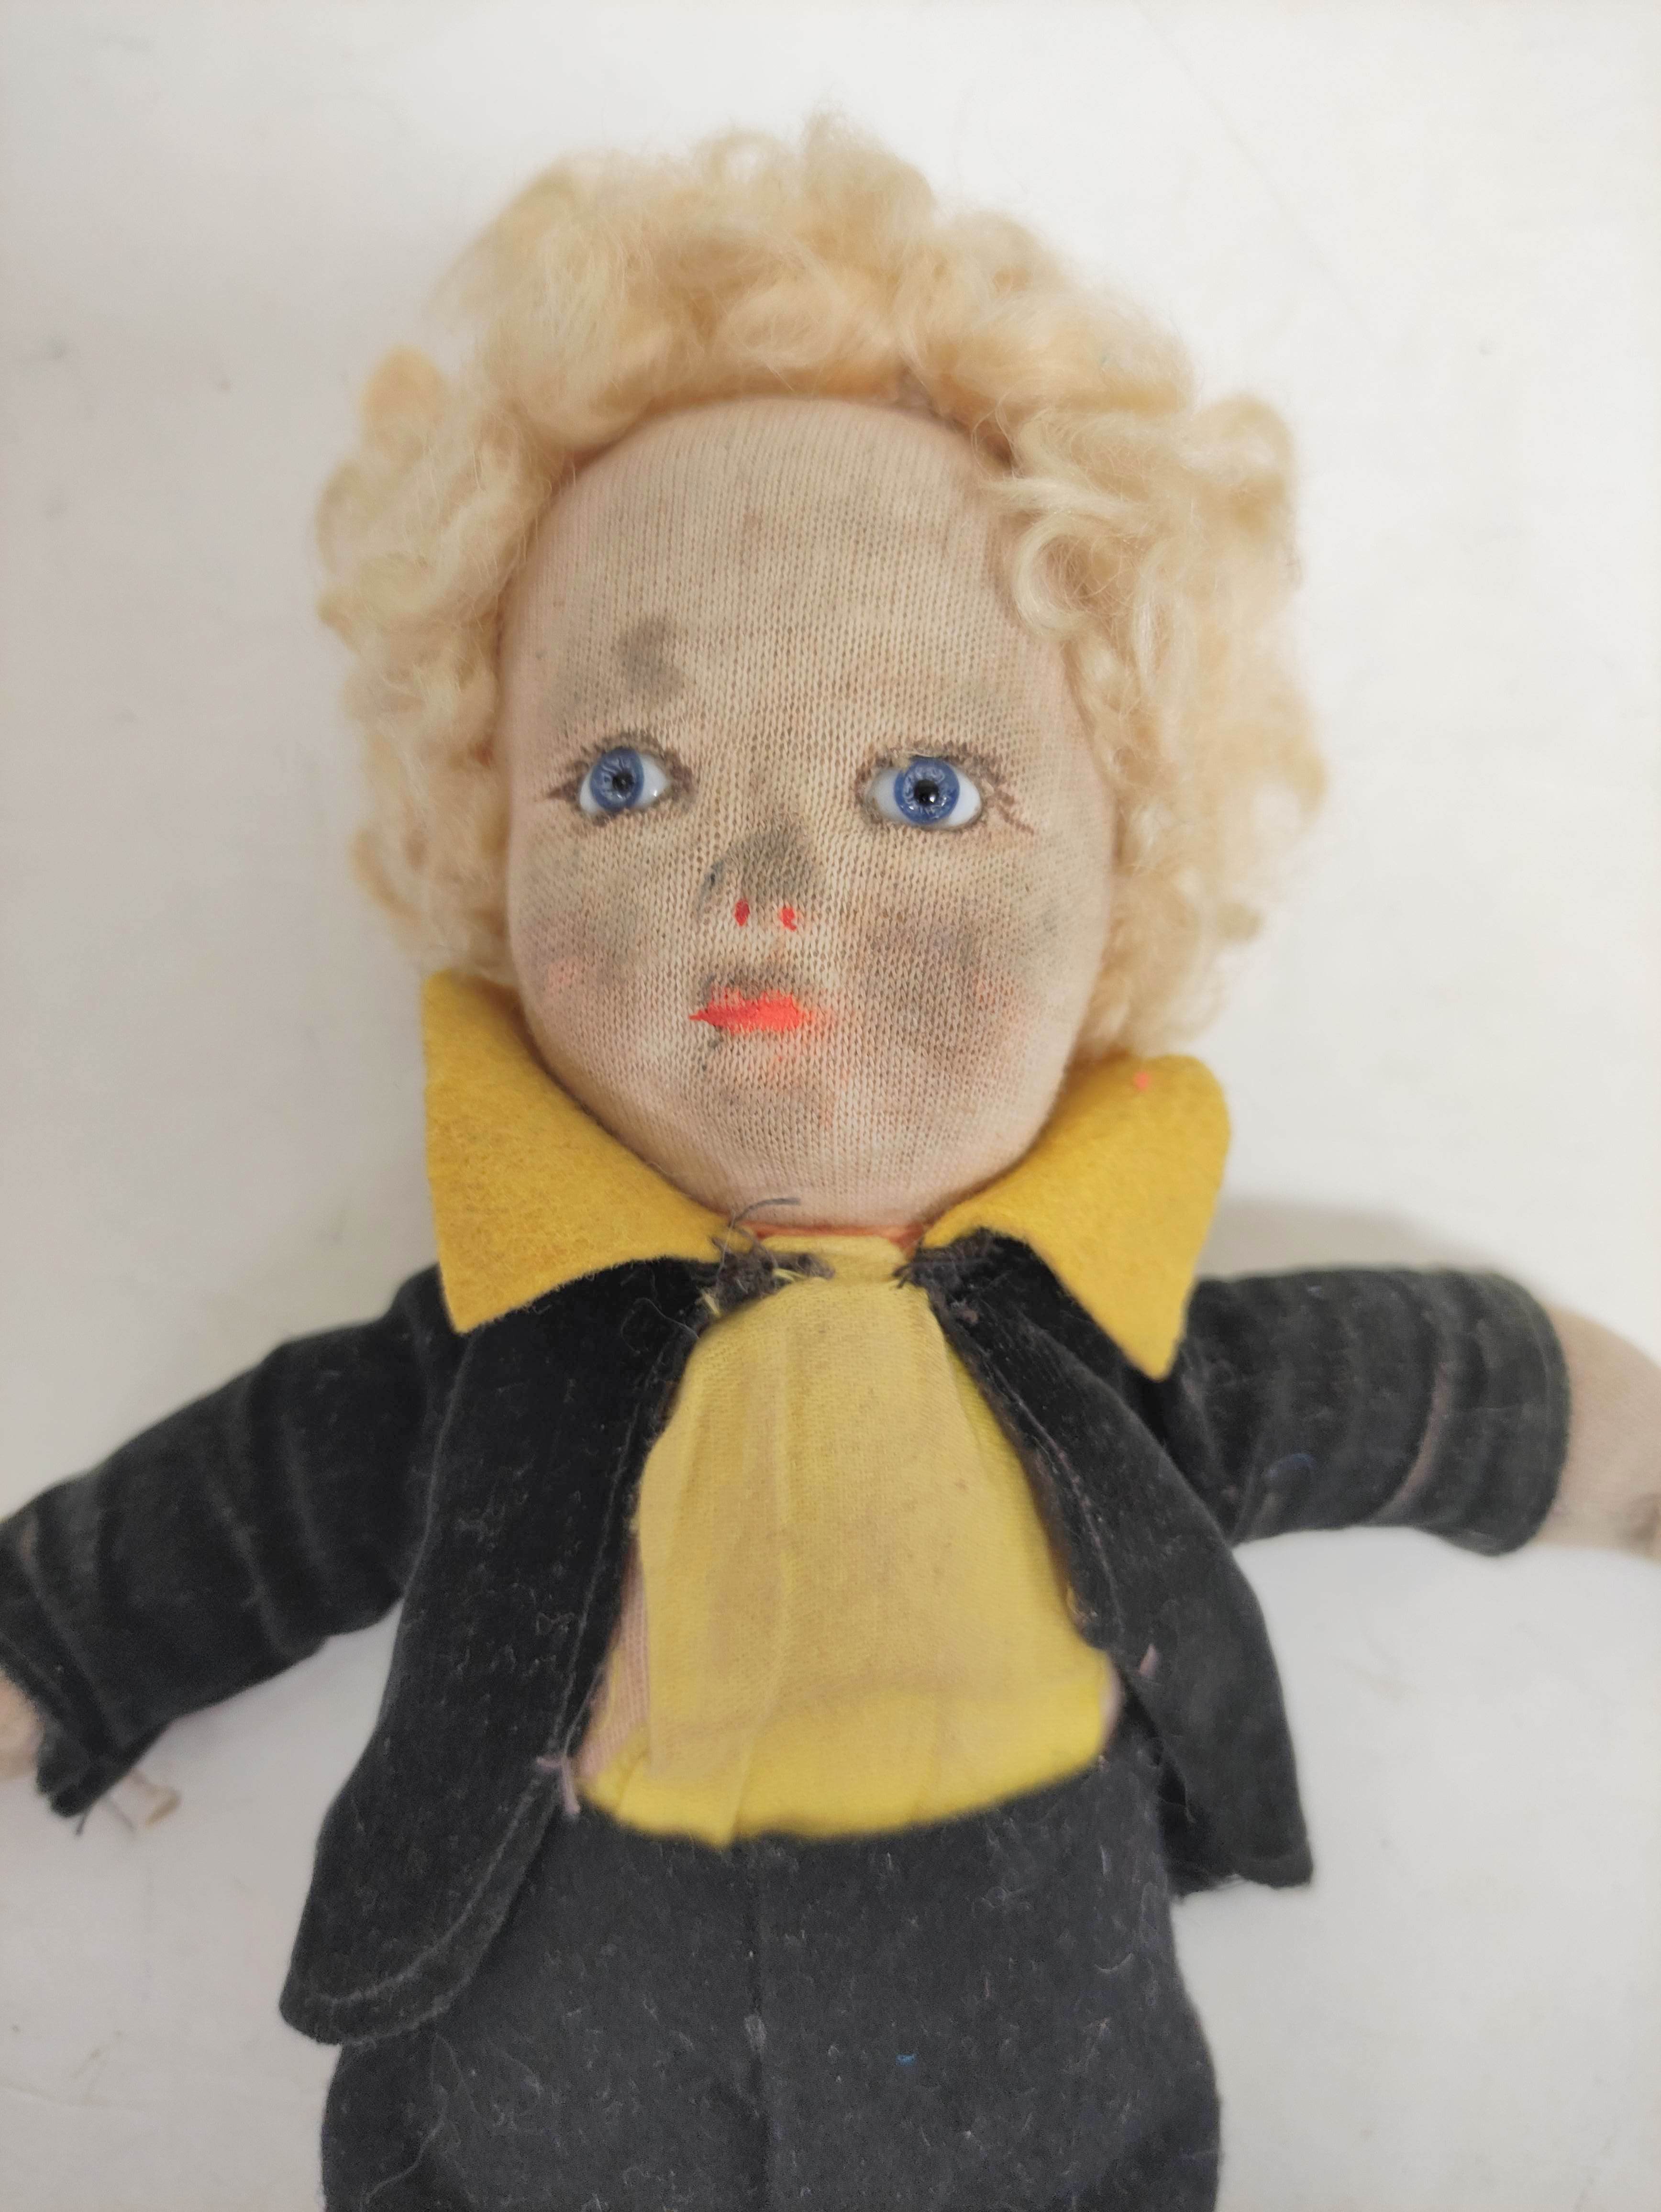 Vintage Chad Valley Hygienic Toys fabric child's doll. - Image 2 of 4